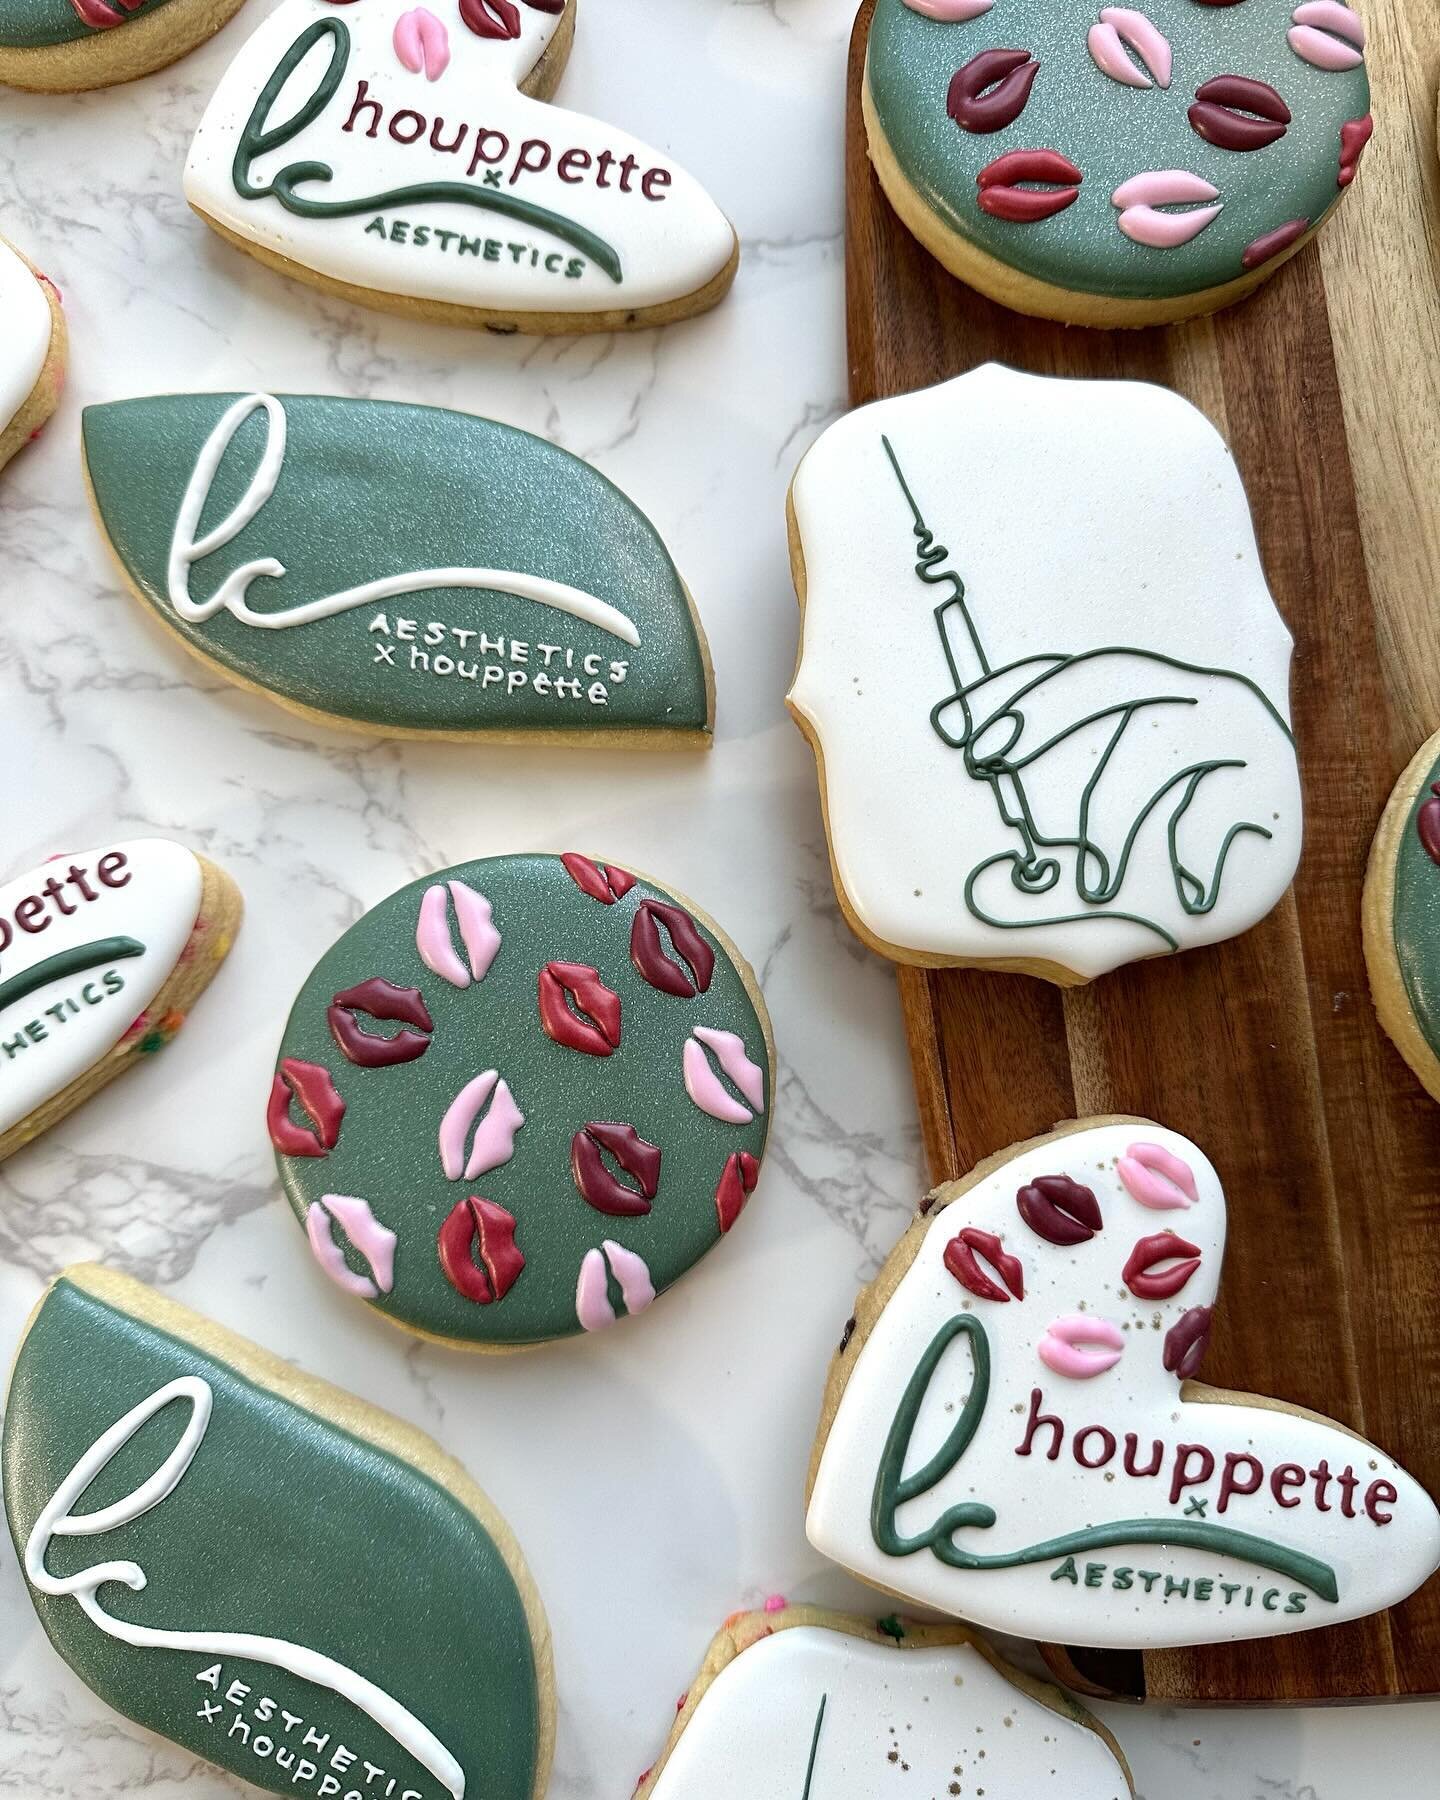 Sending Congratulations to @lisacampbell for launching the MedSpa @houppettebeauty! 

These simple designs were perfect to celebrate this launch and I&rsquo;m so obsessed with the little lip cookies 😍 I may have to bring them back for Valentine&rsqu